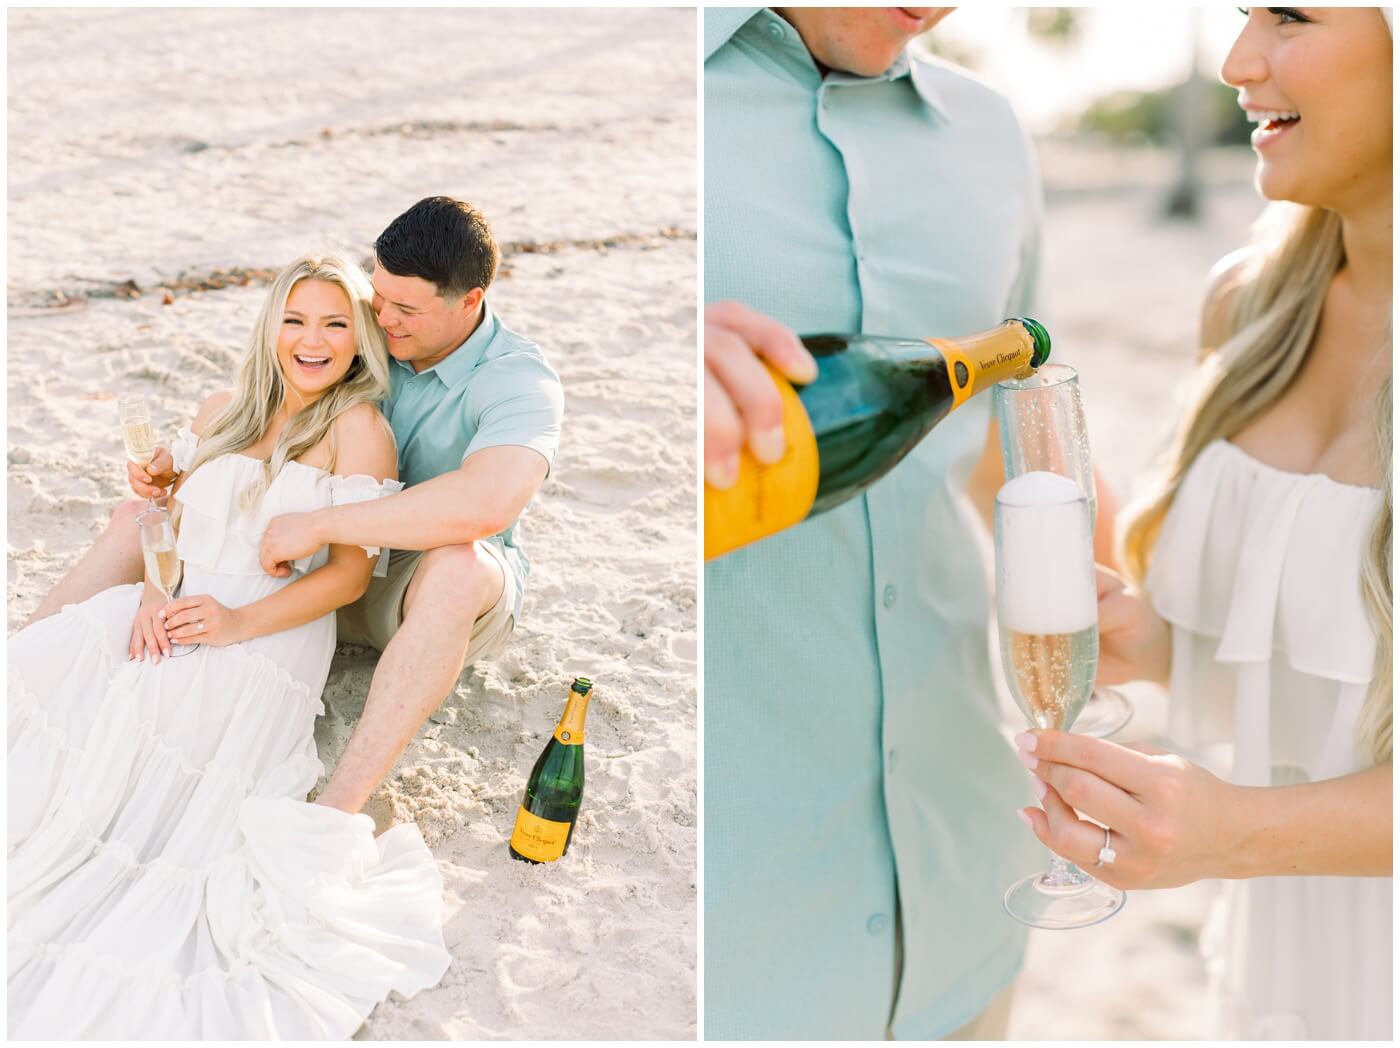 Couple celebrates with champagne together on the beach